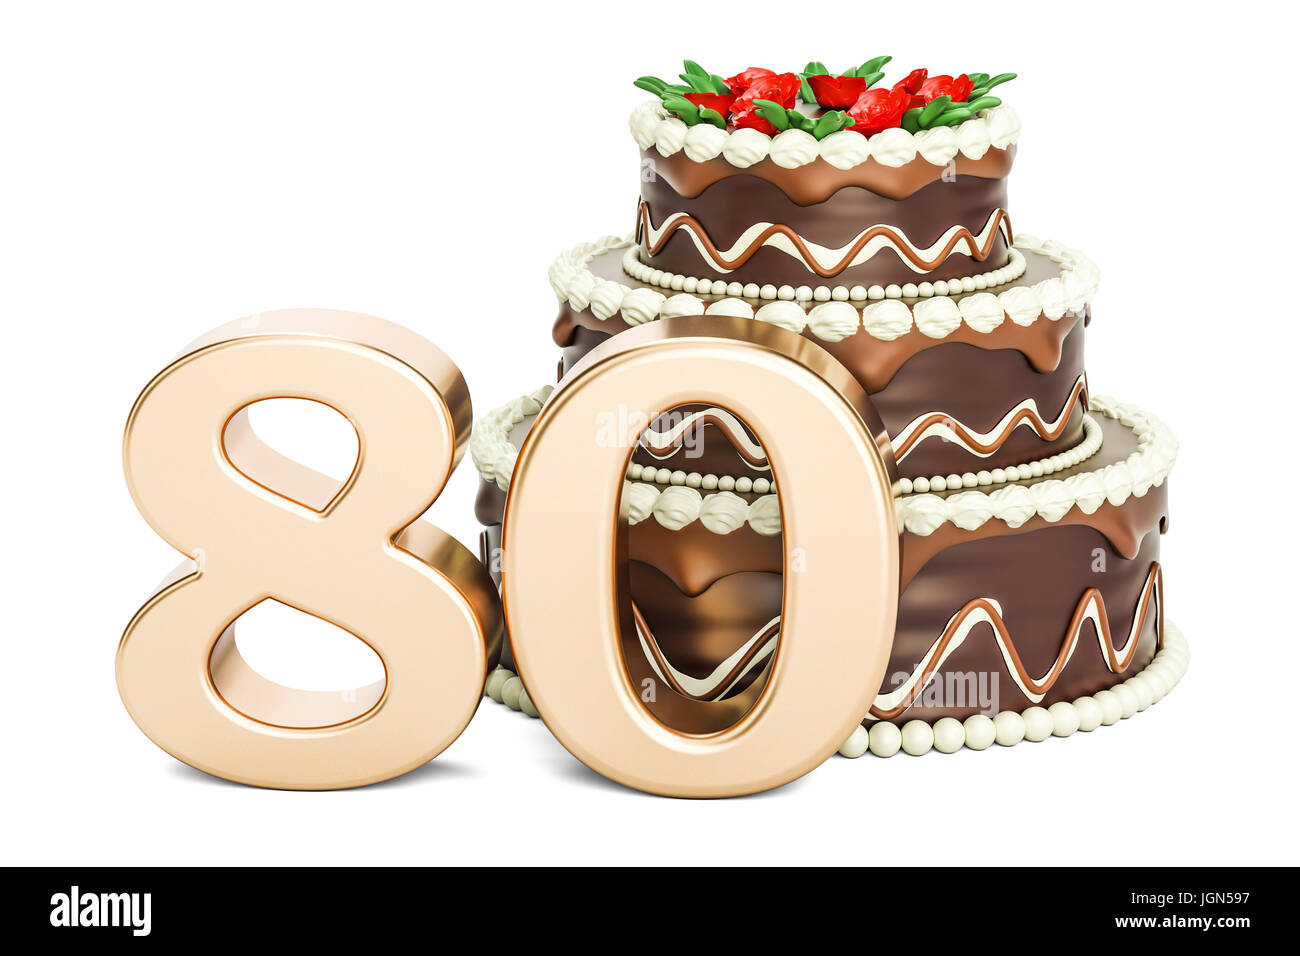 Chocolate Birthday cake with golden number 80, 3D rendering isolated on white background Stock Photo